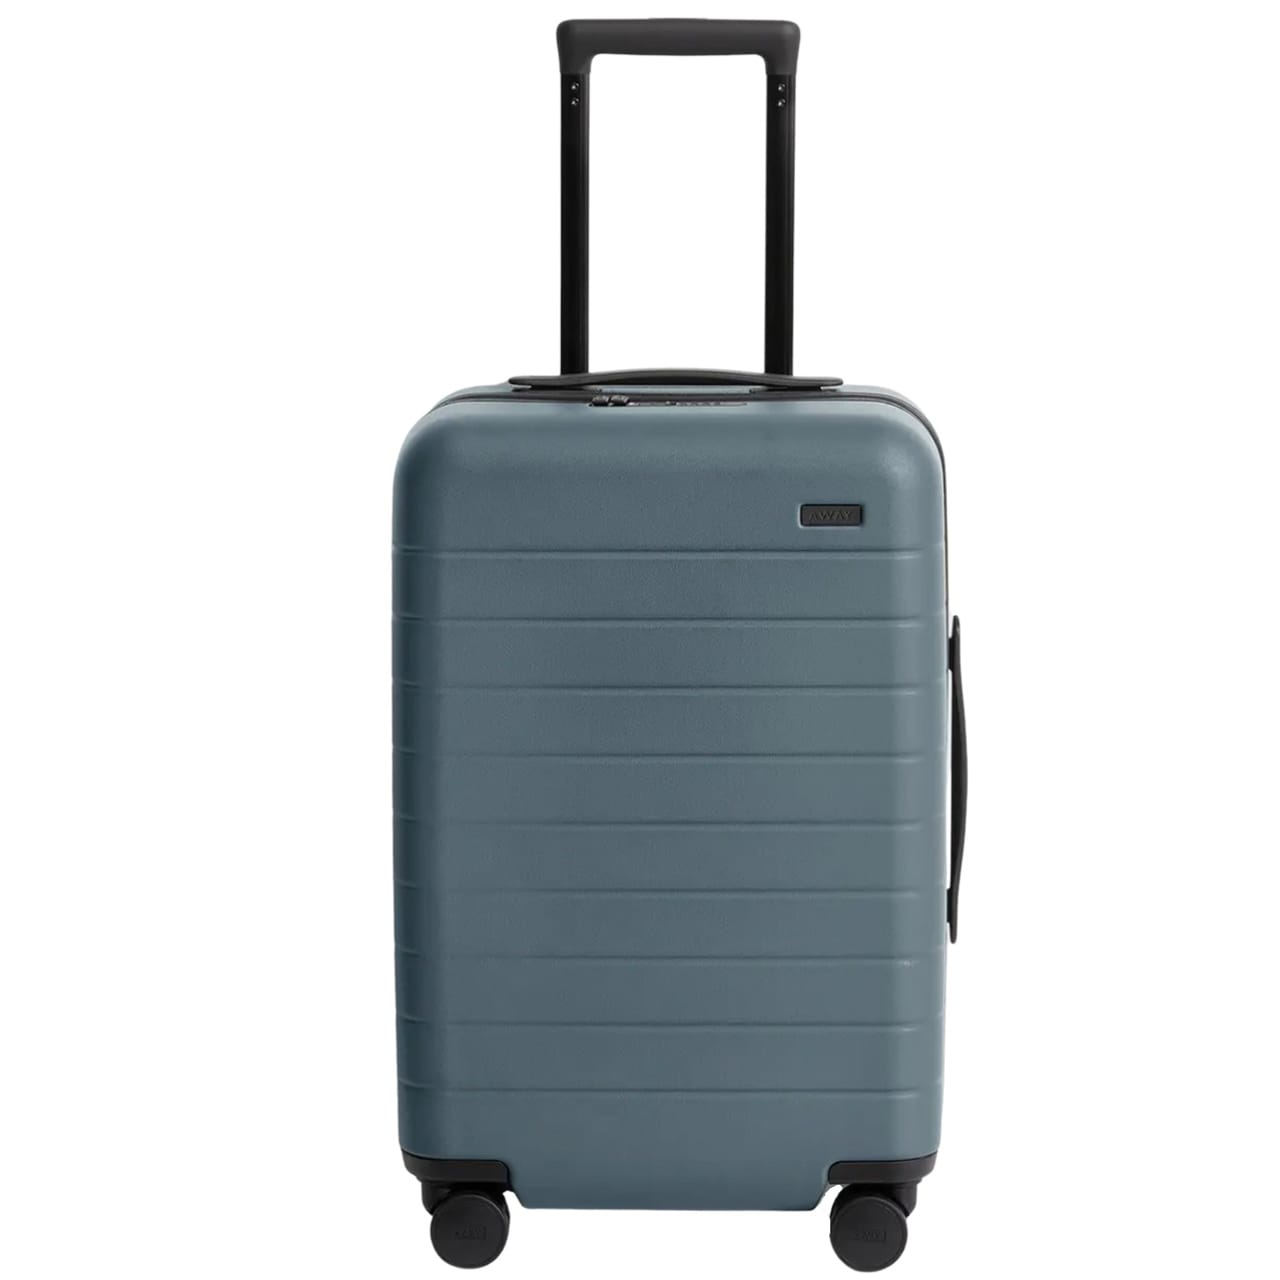 The Perfect Carry-On: AWAY Luggage at Nordstrom - Style by Karen